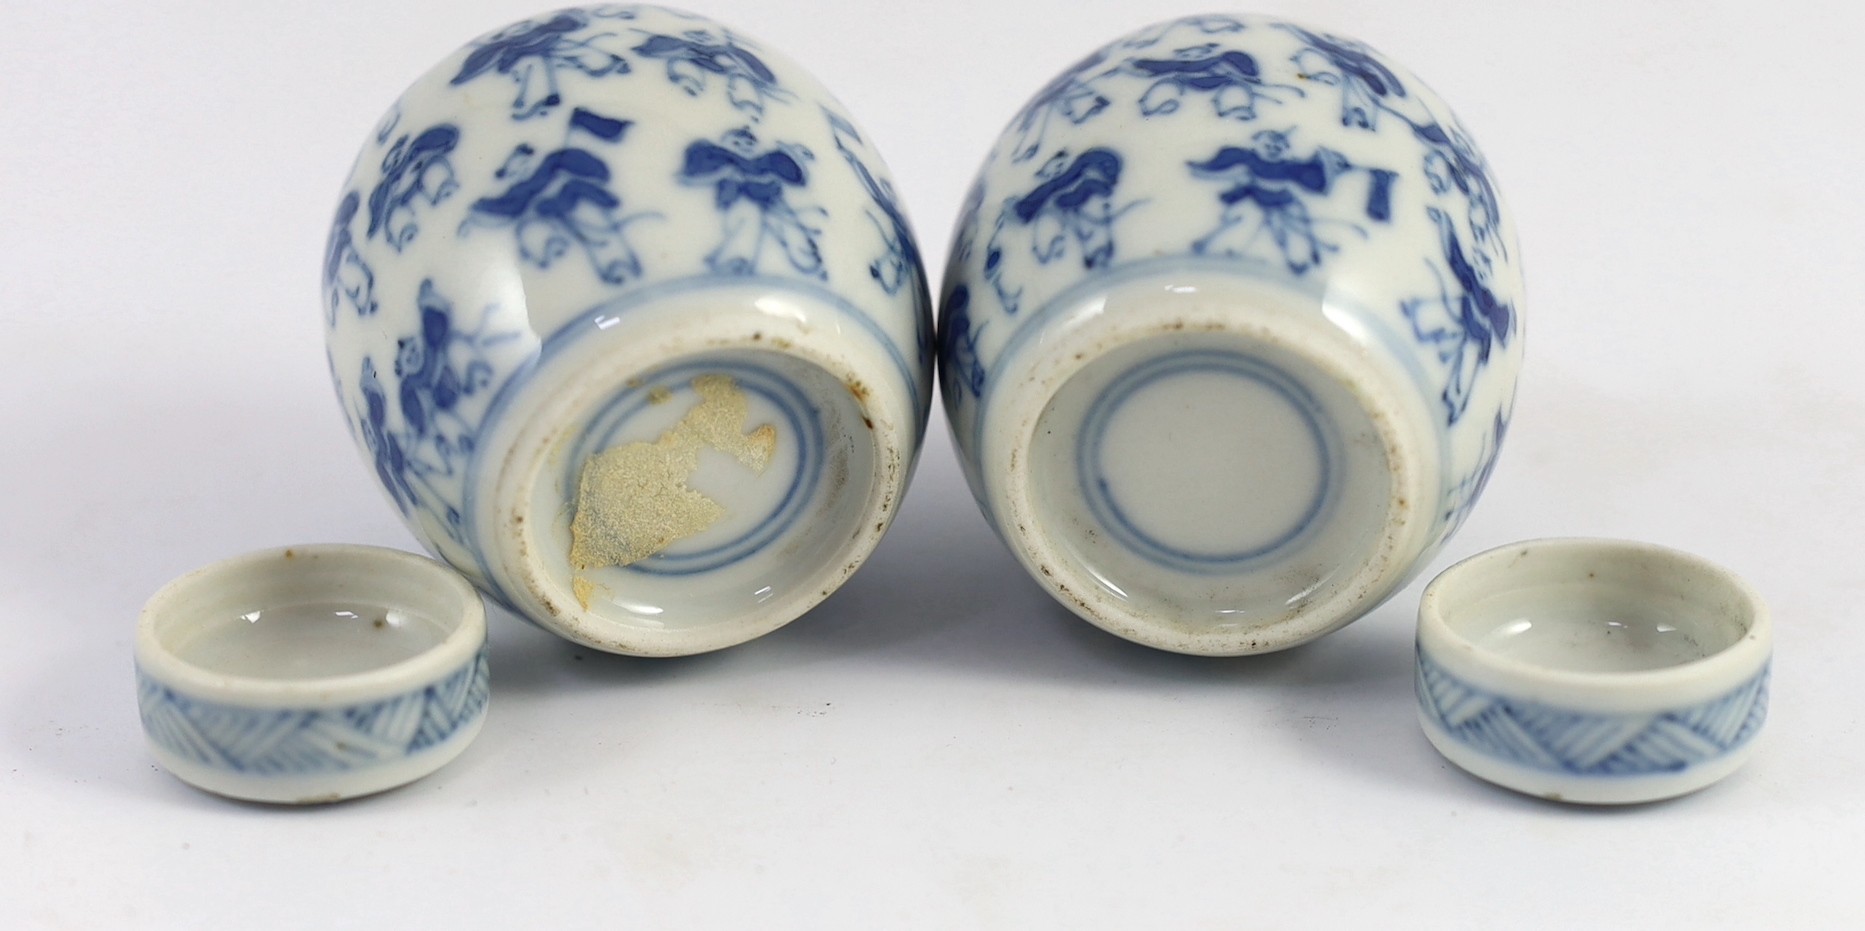 A pair of 19th century Chinese blue and white boys miniature jars and covers, 5.5 cm high - Image 5 of 5